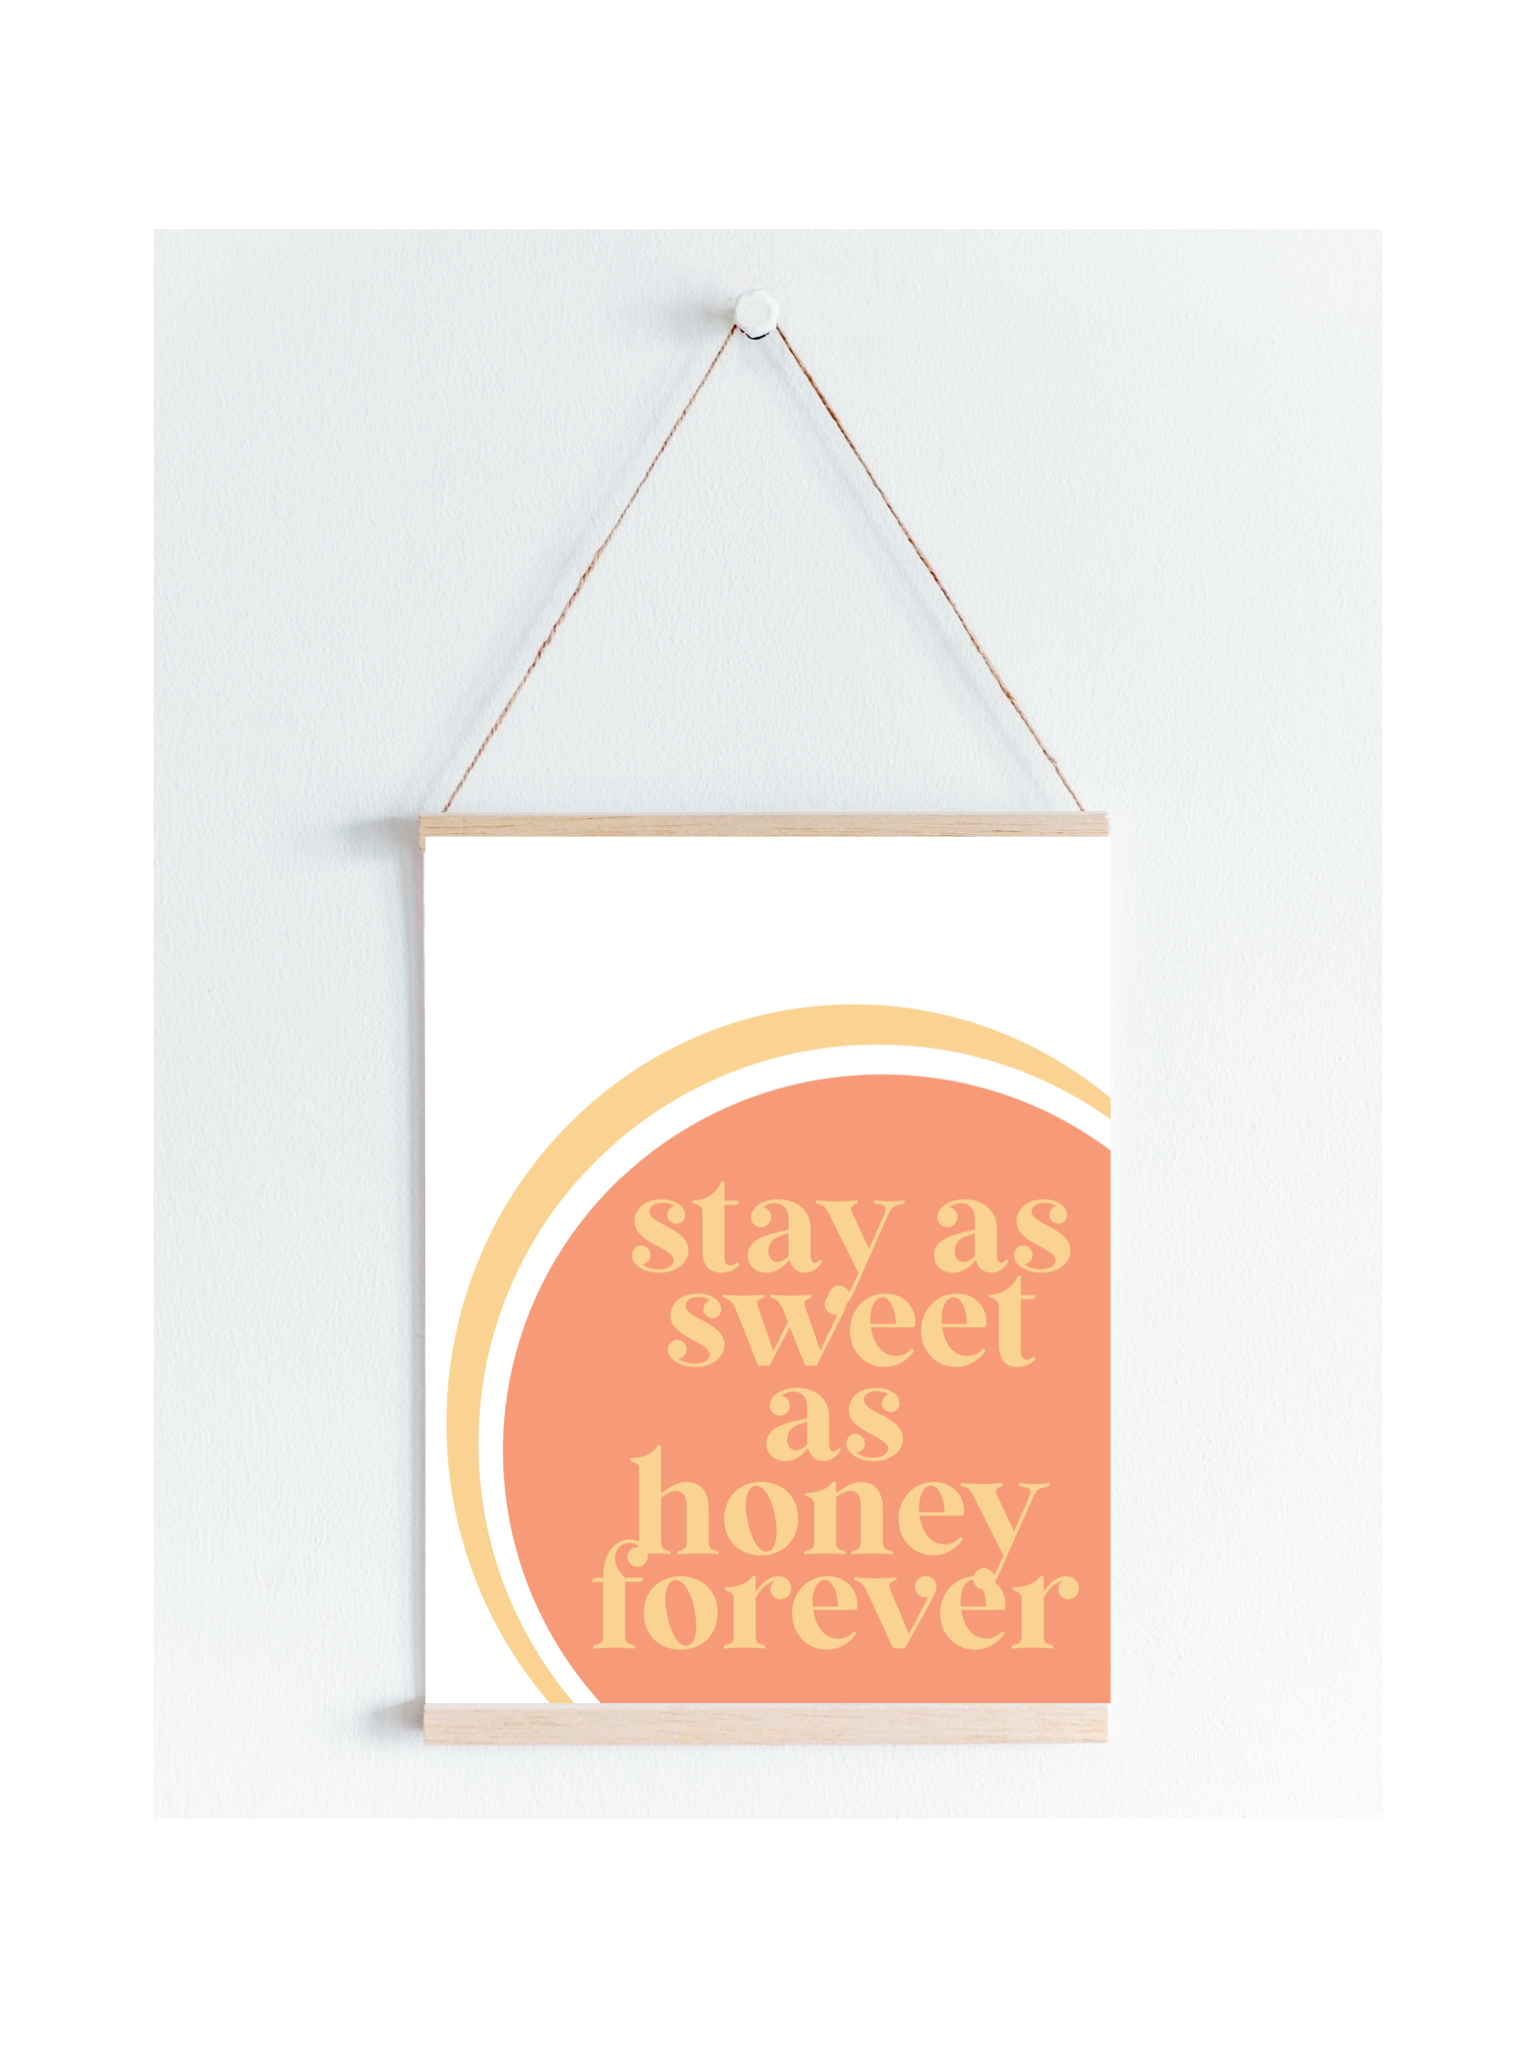 Stay as sweet as honey kids quote print available A5, A4 and A3